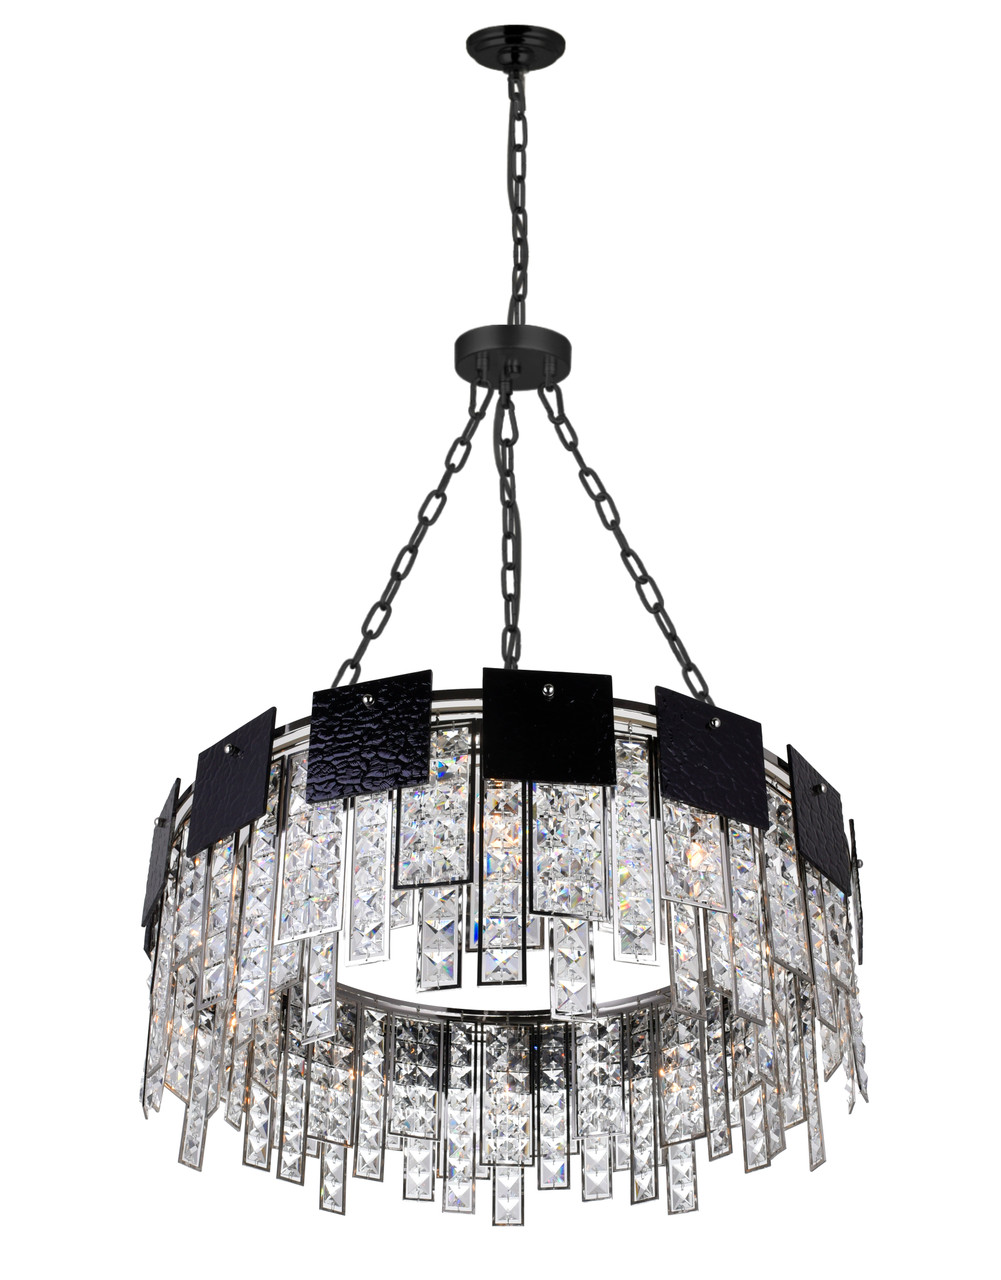 CWI LIGHTING 1099P32-10-613 10 Light Down Chandelier with Polished Nickel Finish